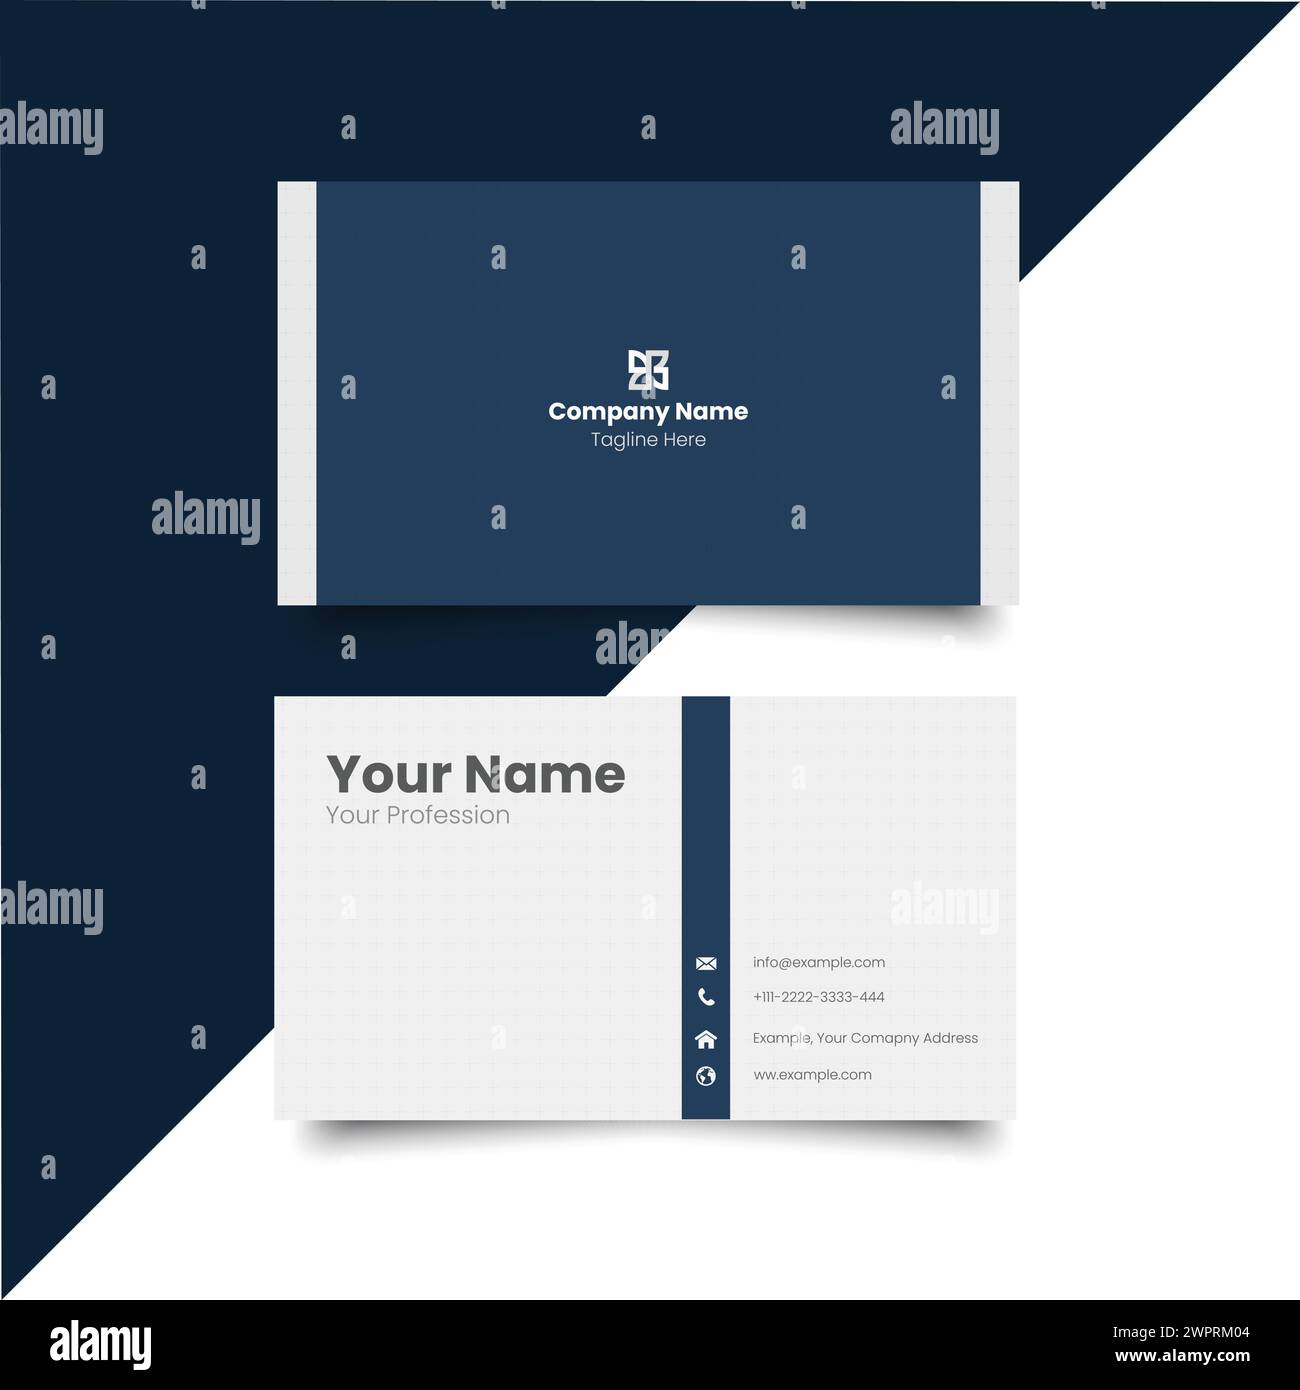 Simple Business Card Layout. creative modern name card and business card. Clean Design.Corporate design template, Clean professional business template Stock Vector